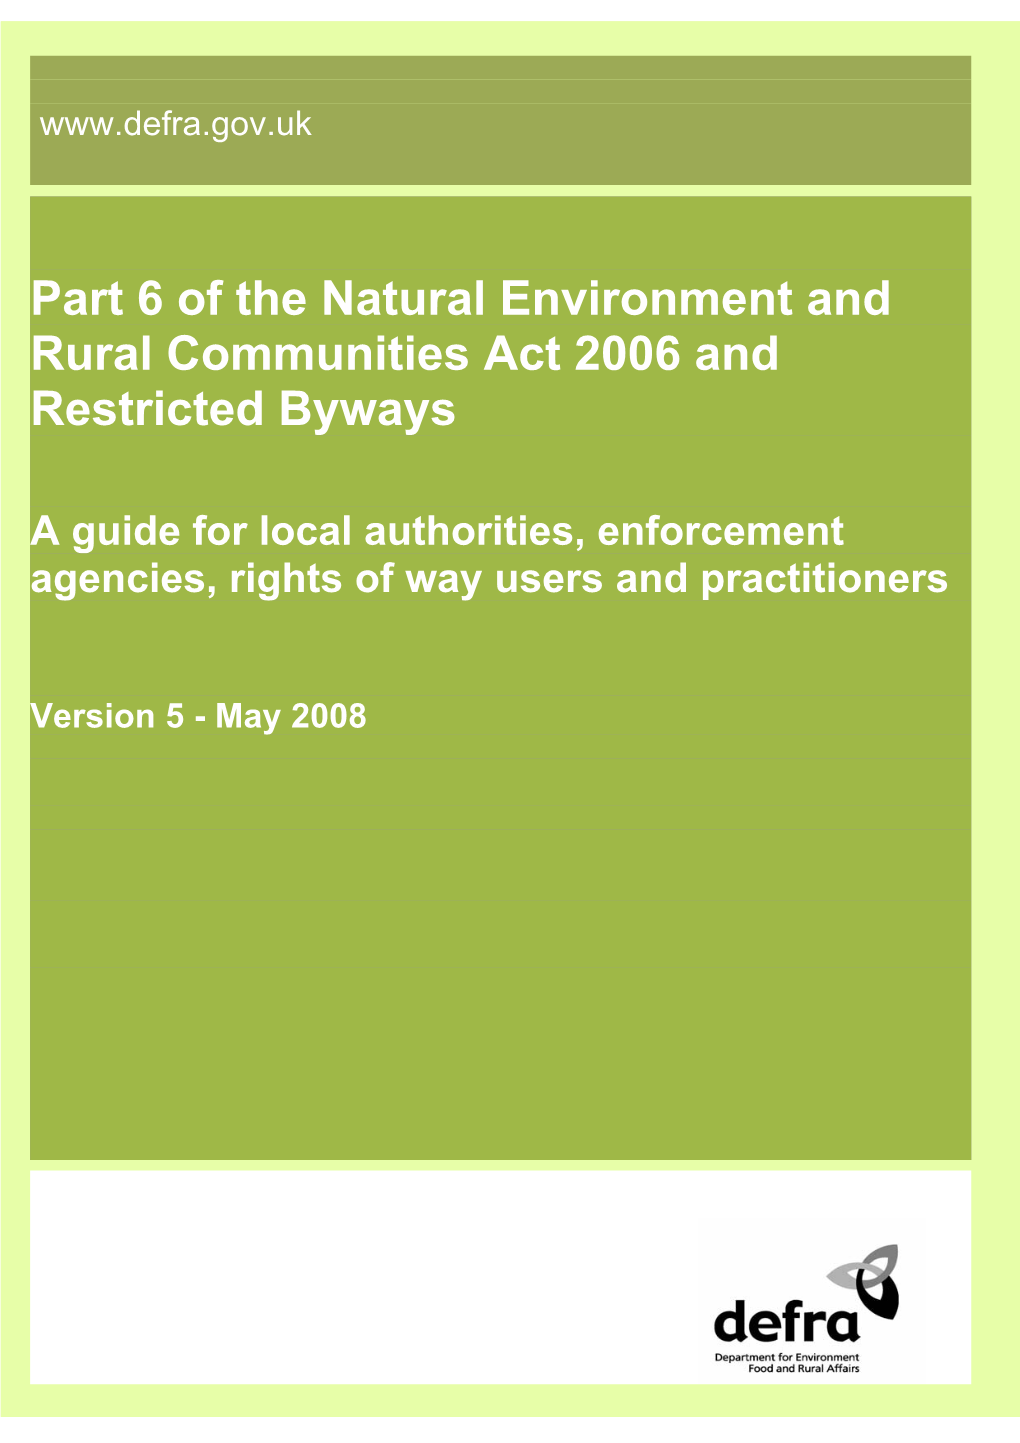 Defra Guidance on Part 6 of the NERC Act 2006